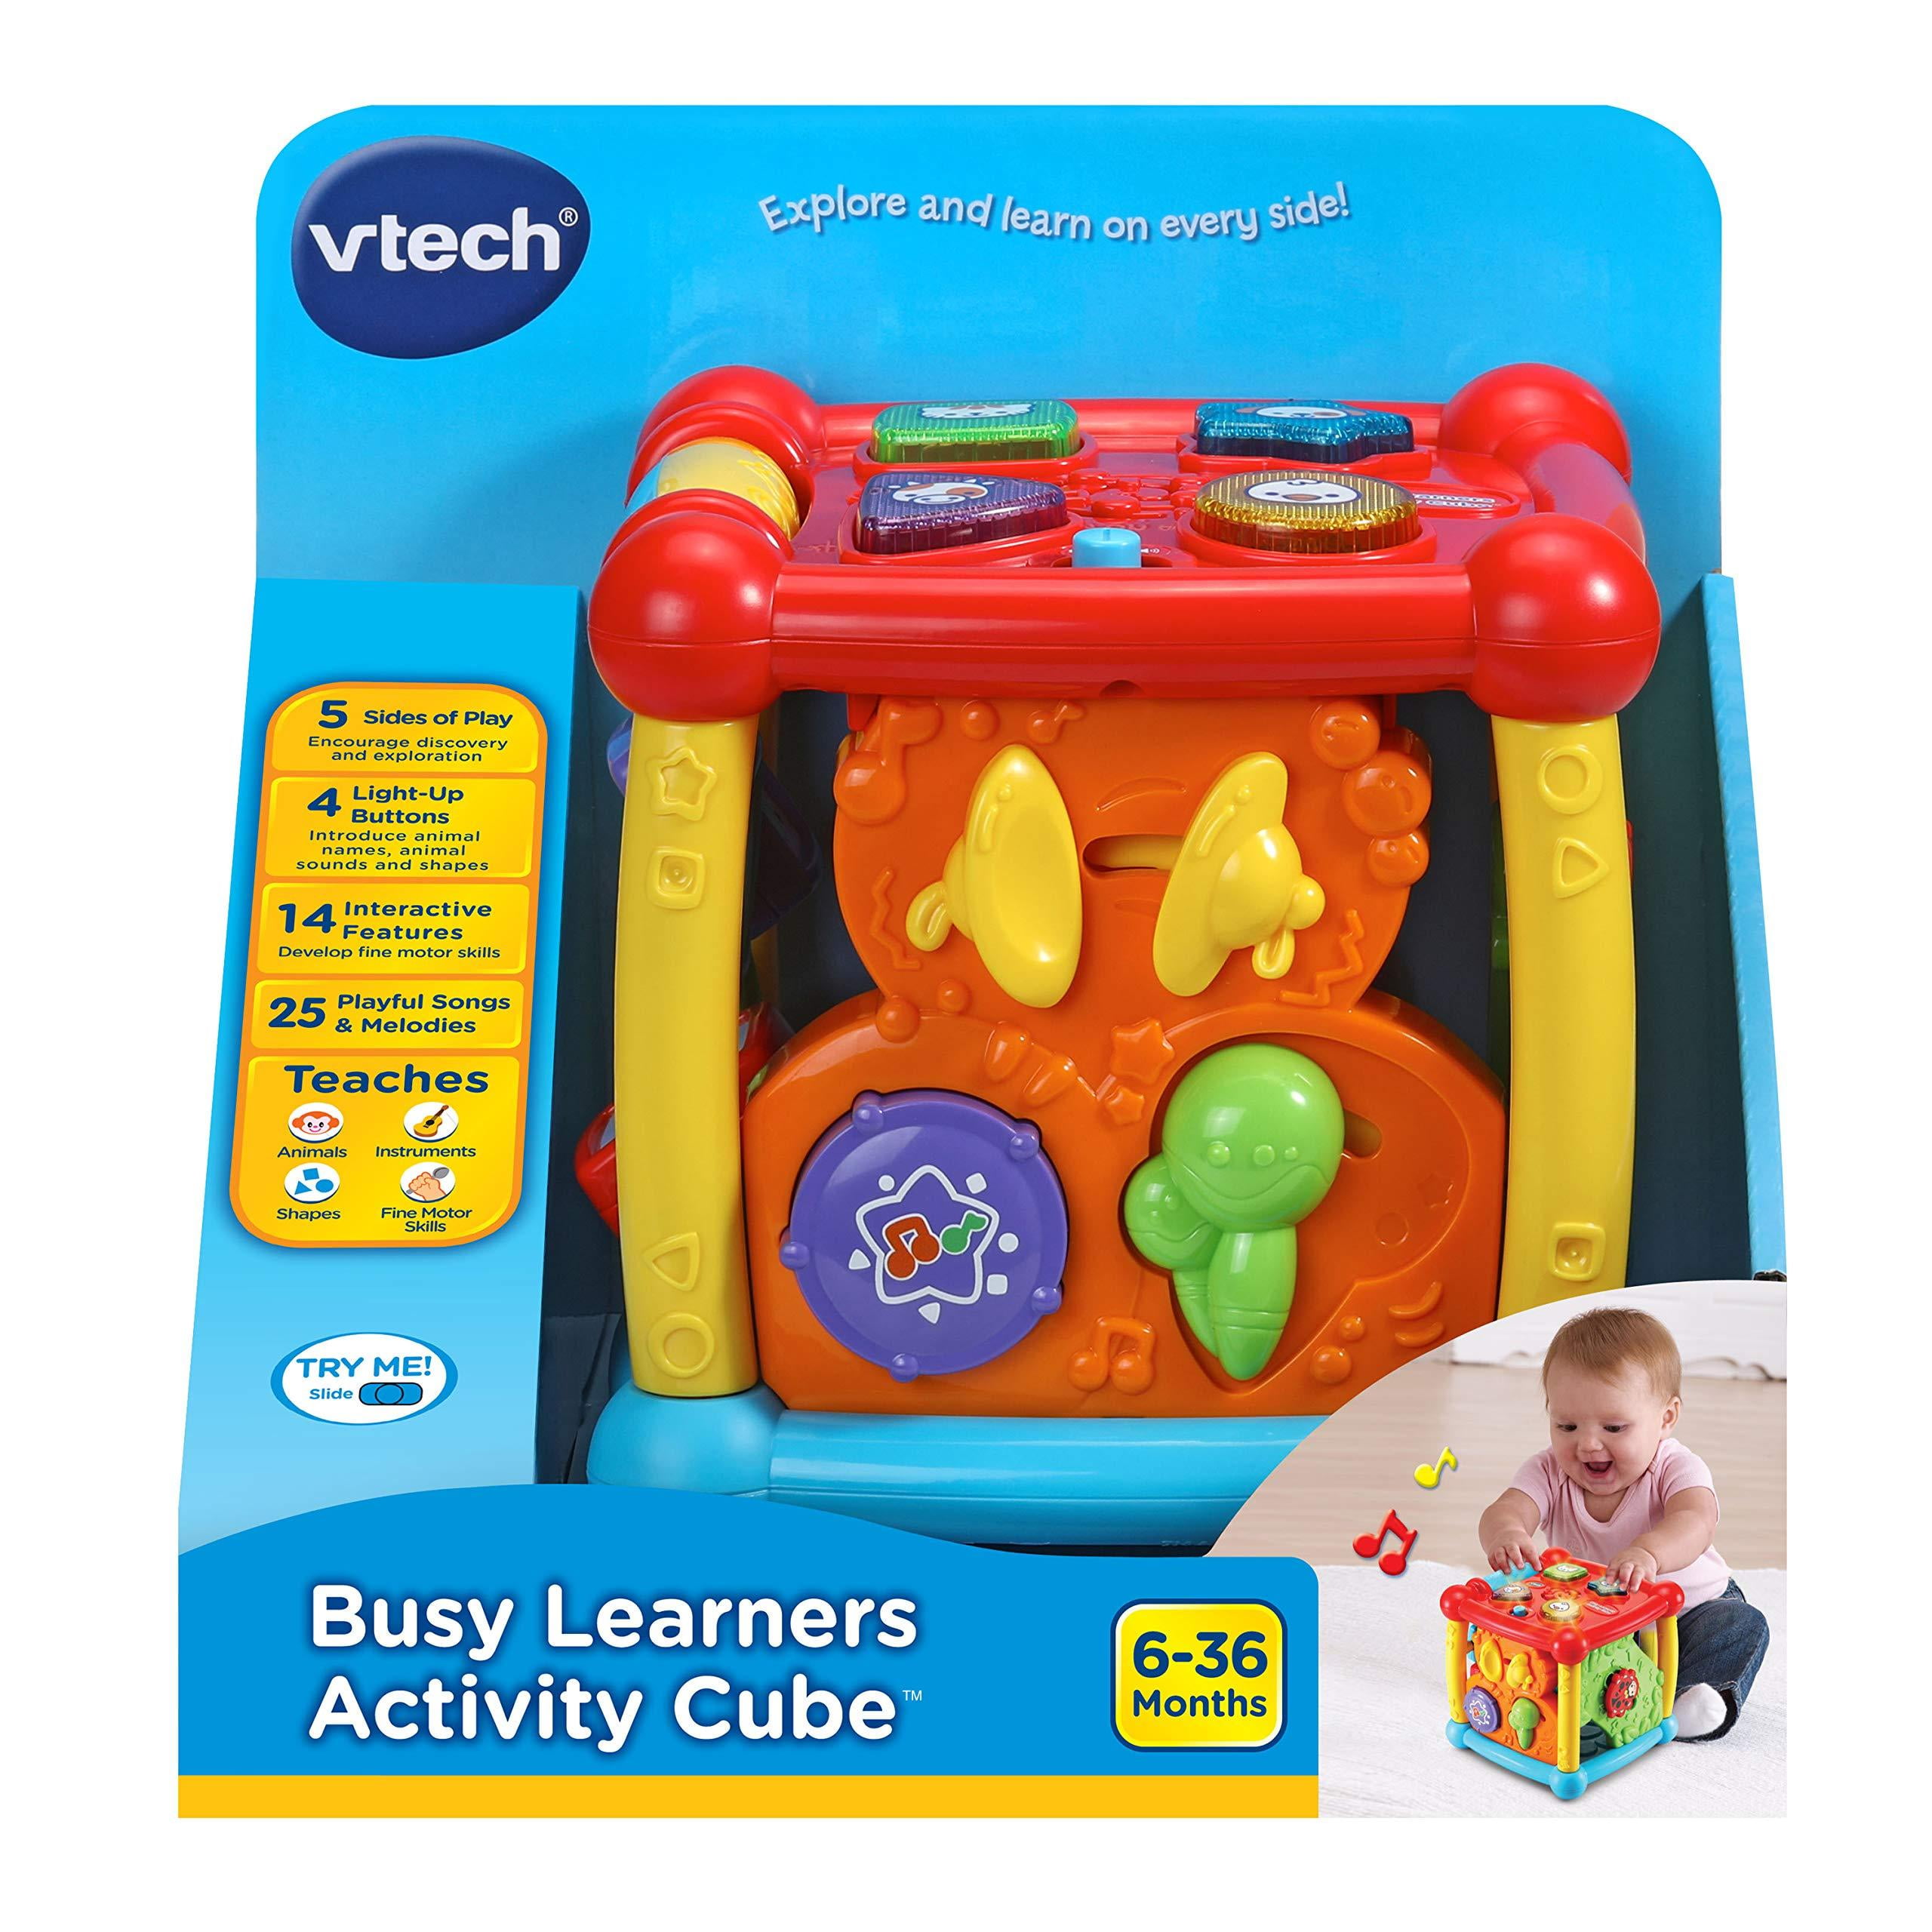 Retail Packaging - English Version Details about   VTech Busy Learners Activity Cube 